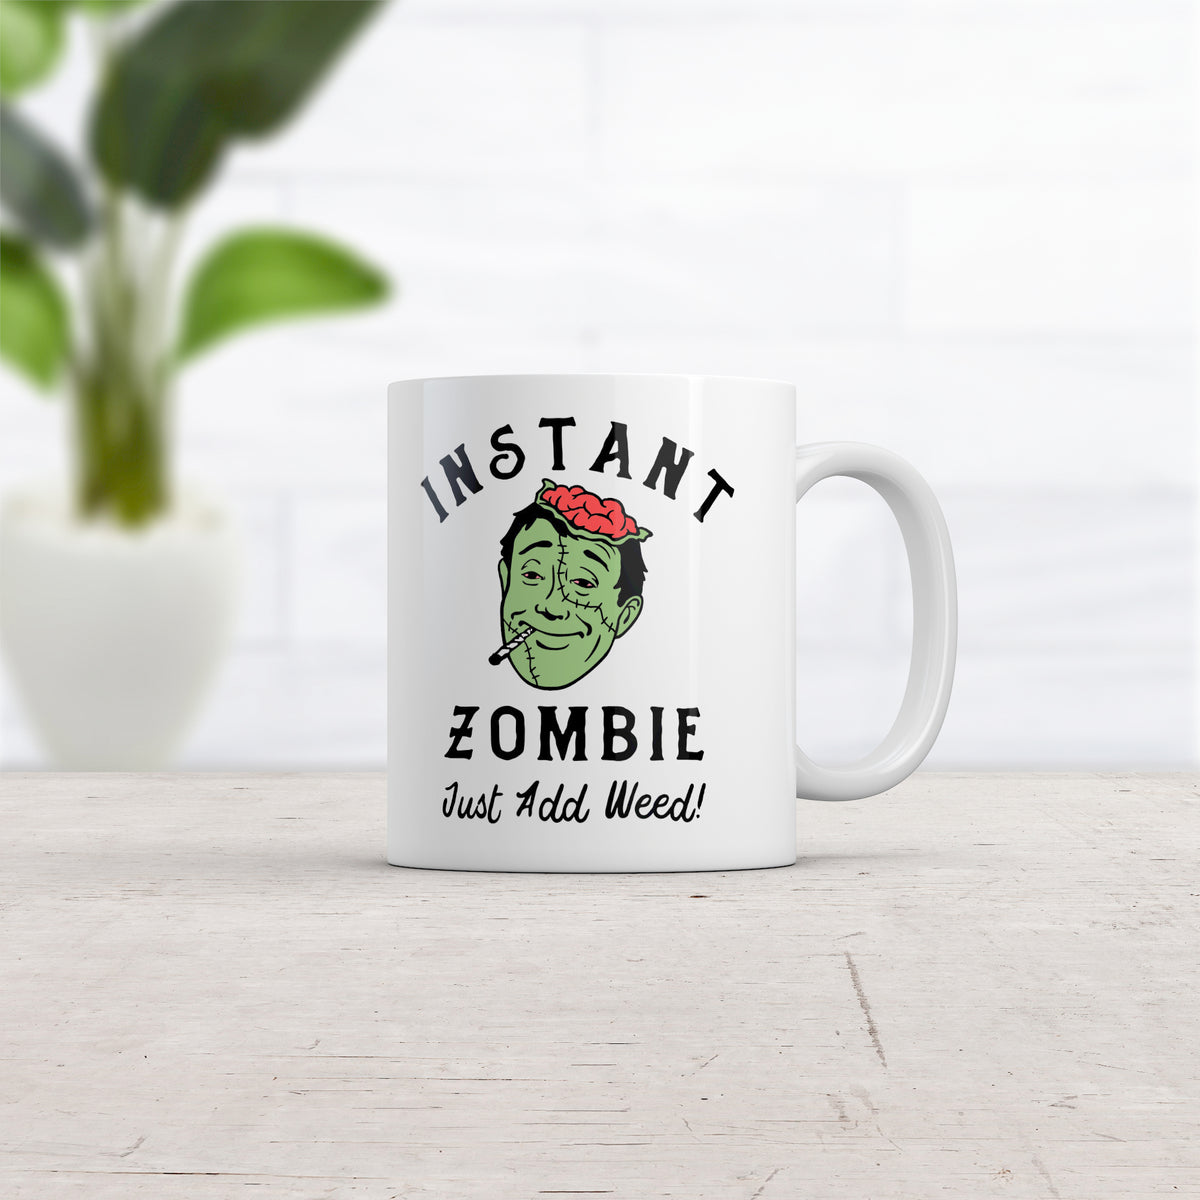 Instant Zombie Just Add Weed Mug